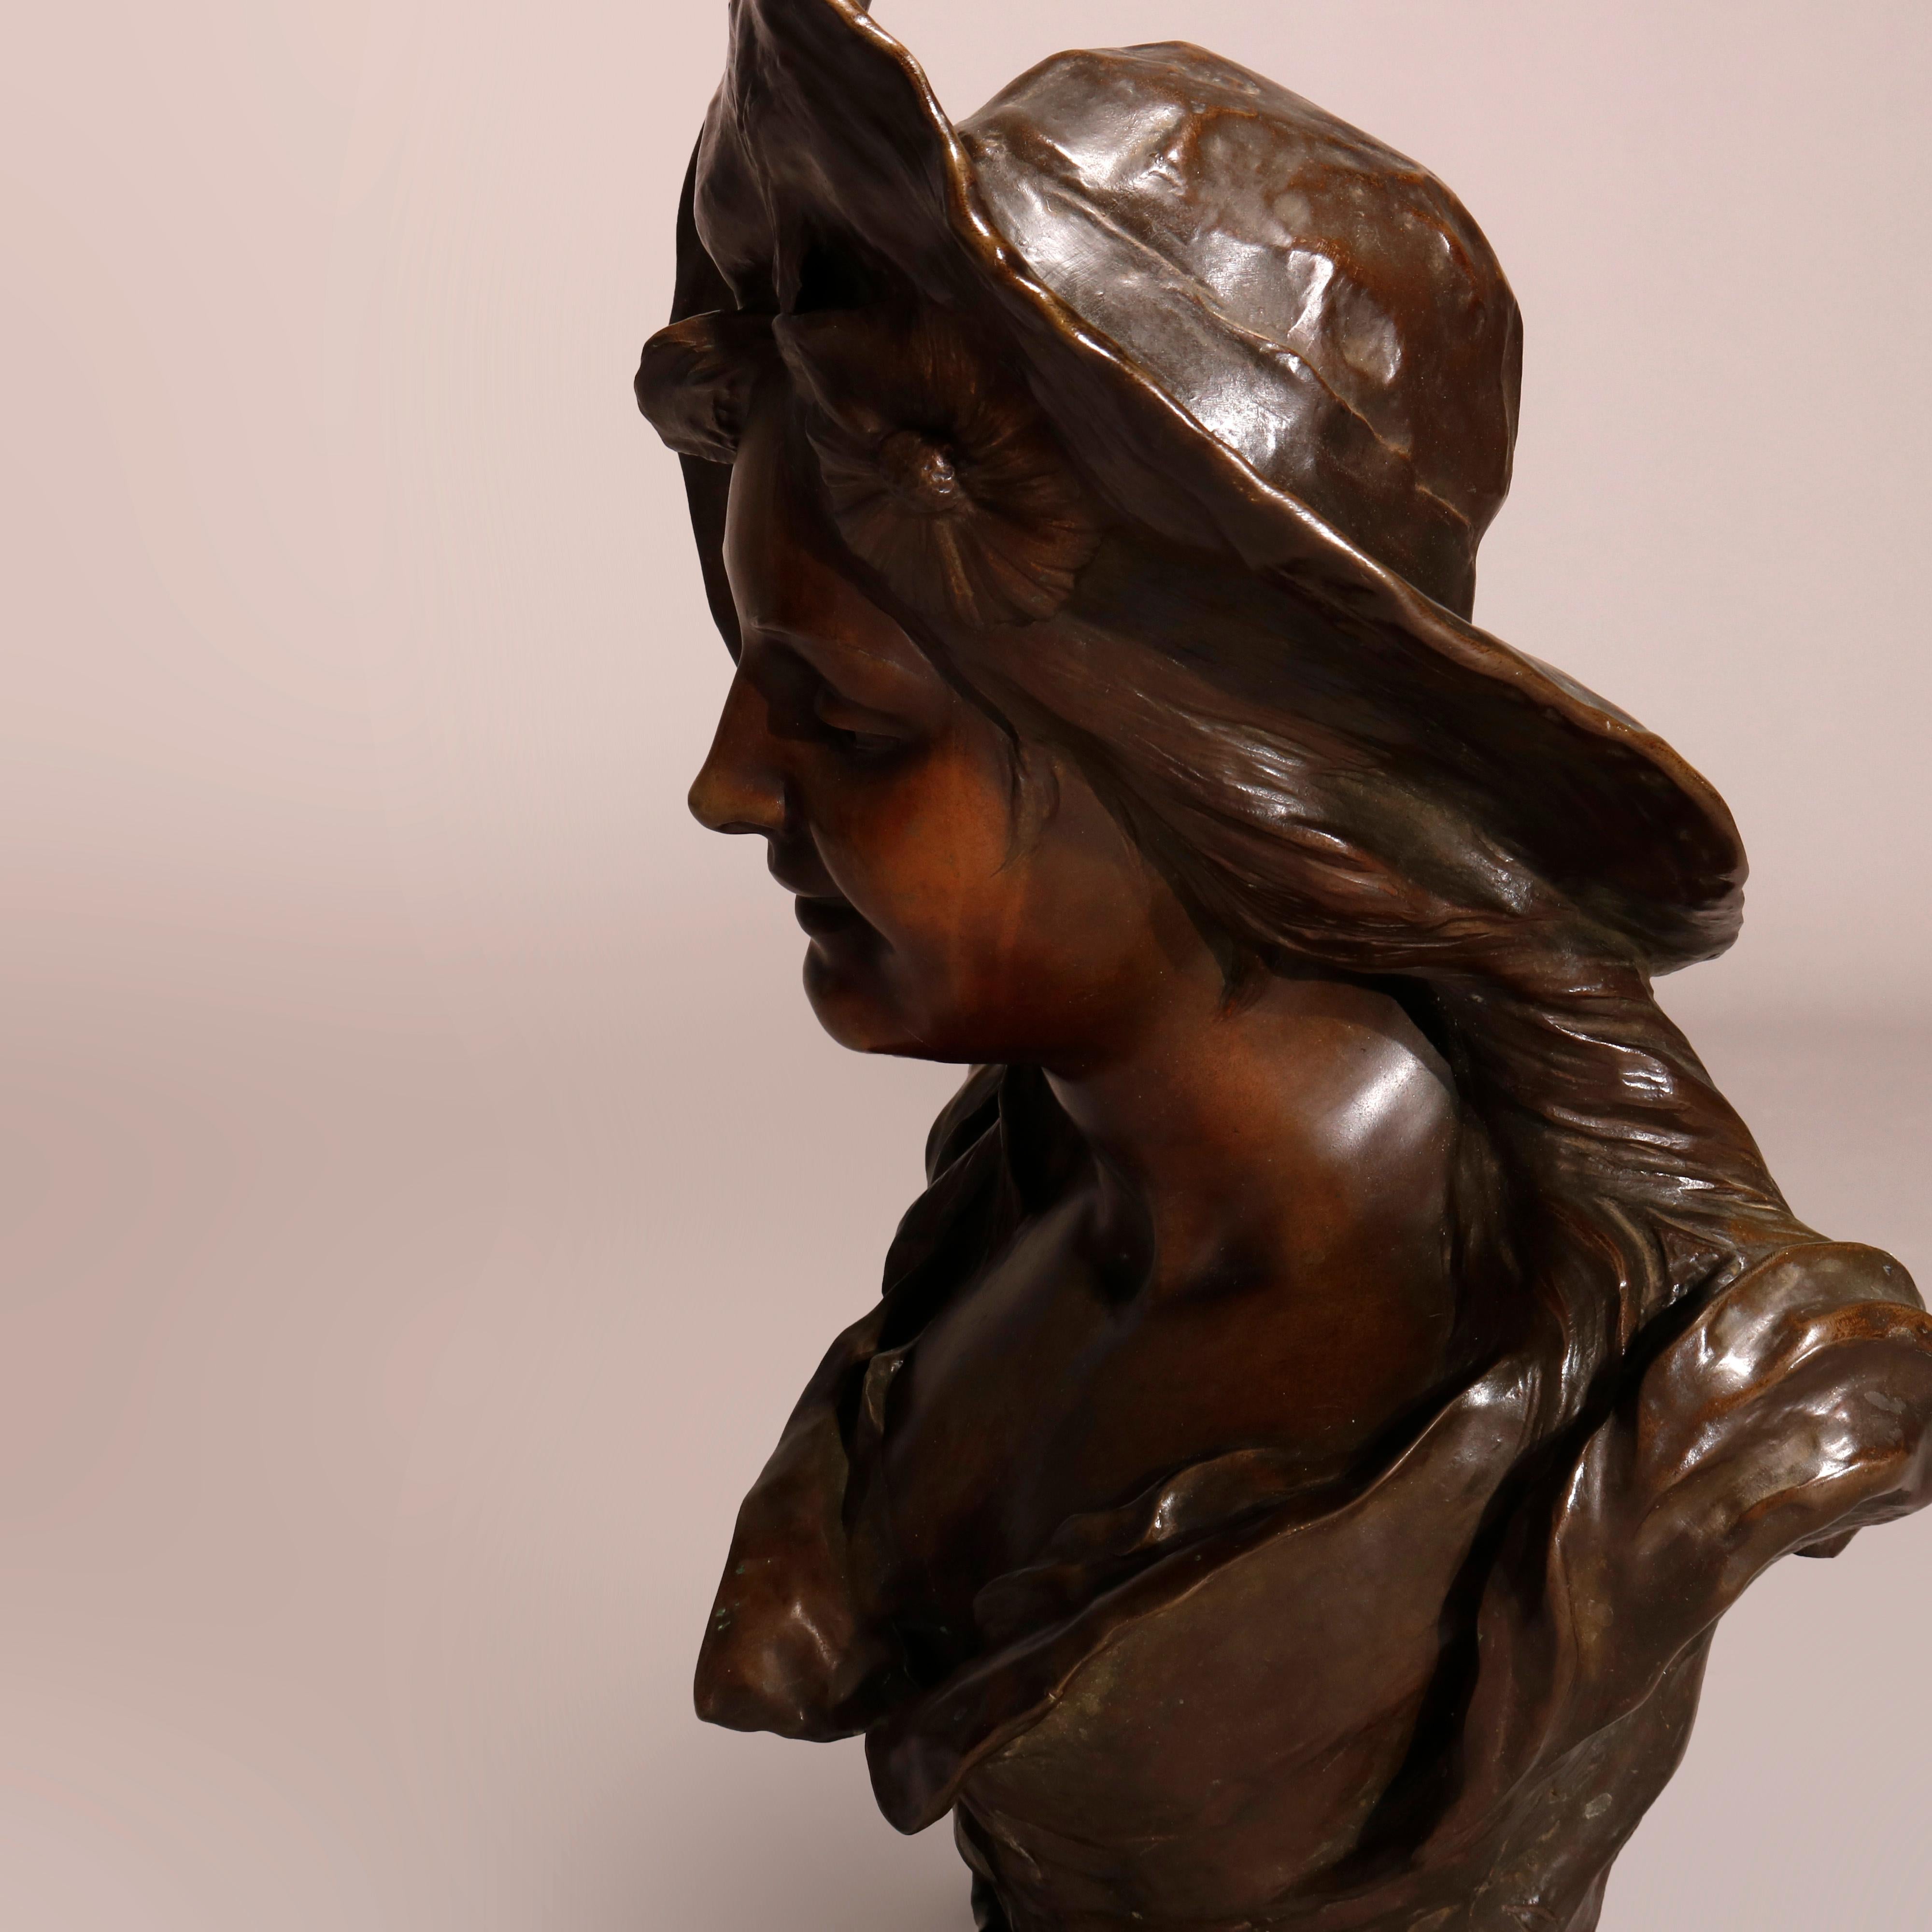 20th Century Antique Large French Art Nouveau Sculpture of a Woman in Hat, Signed, Circa 1890